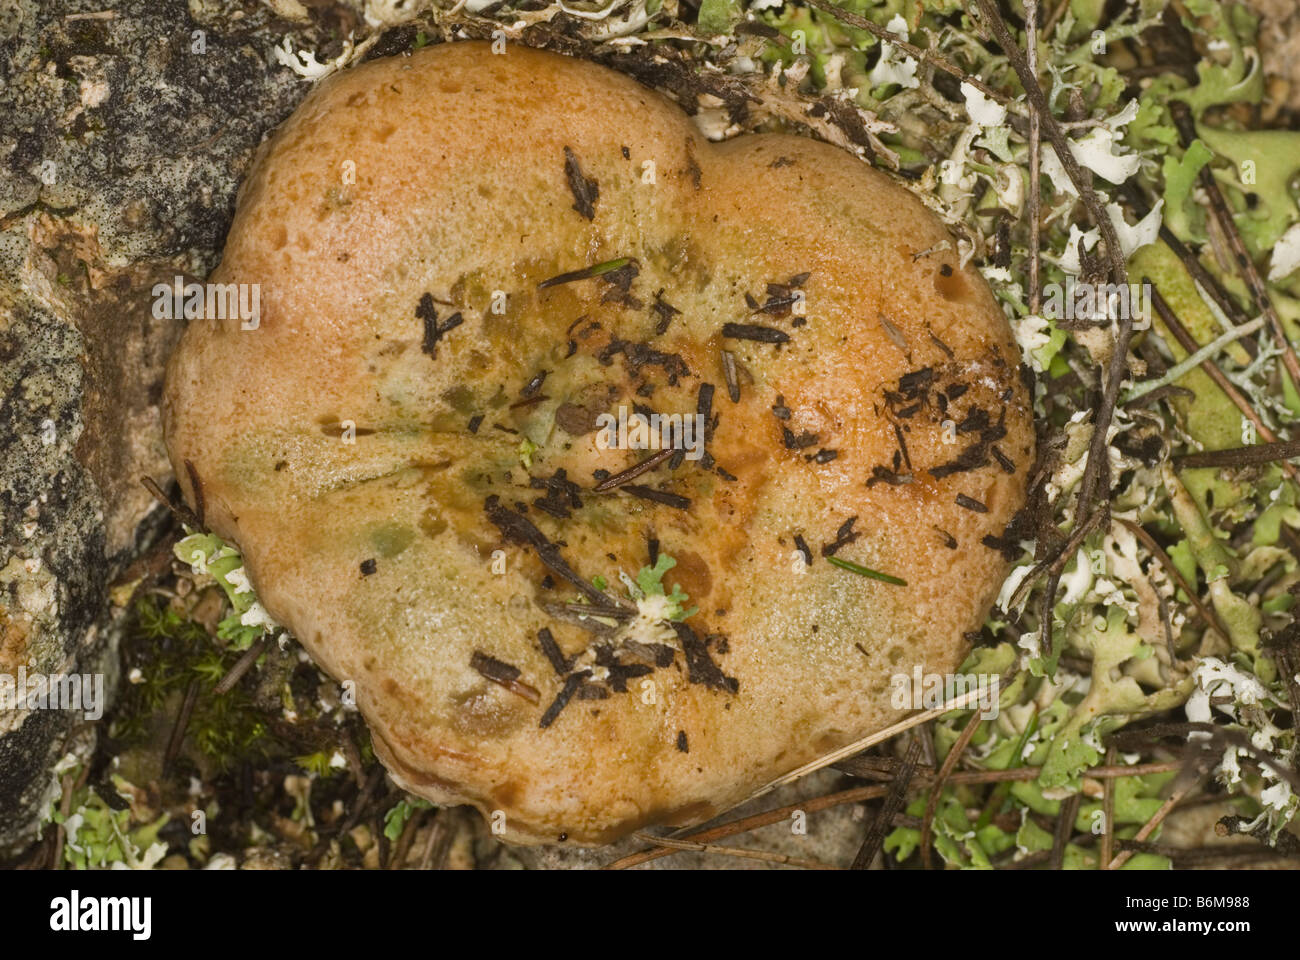 Red pine mushroom seen from above Stock Photo